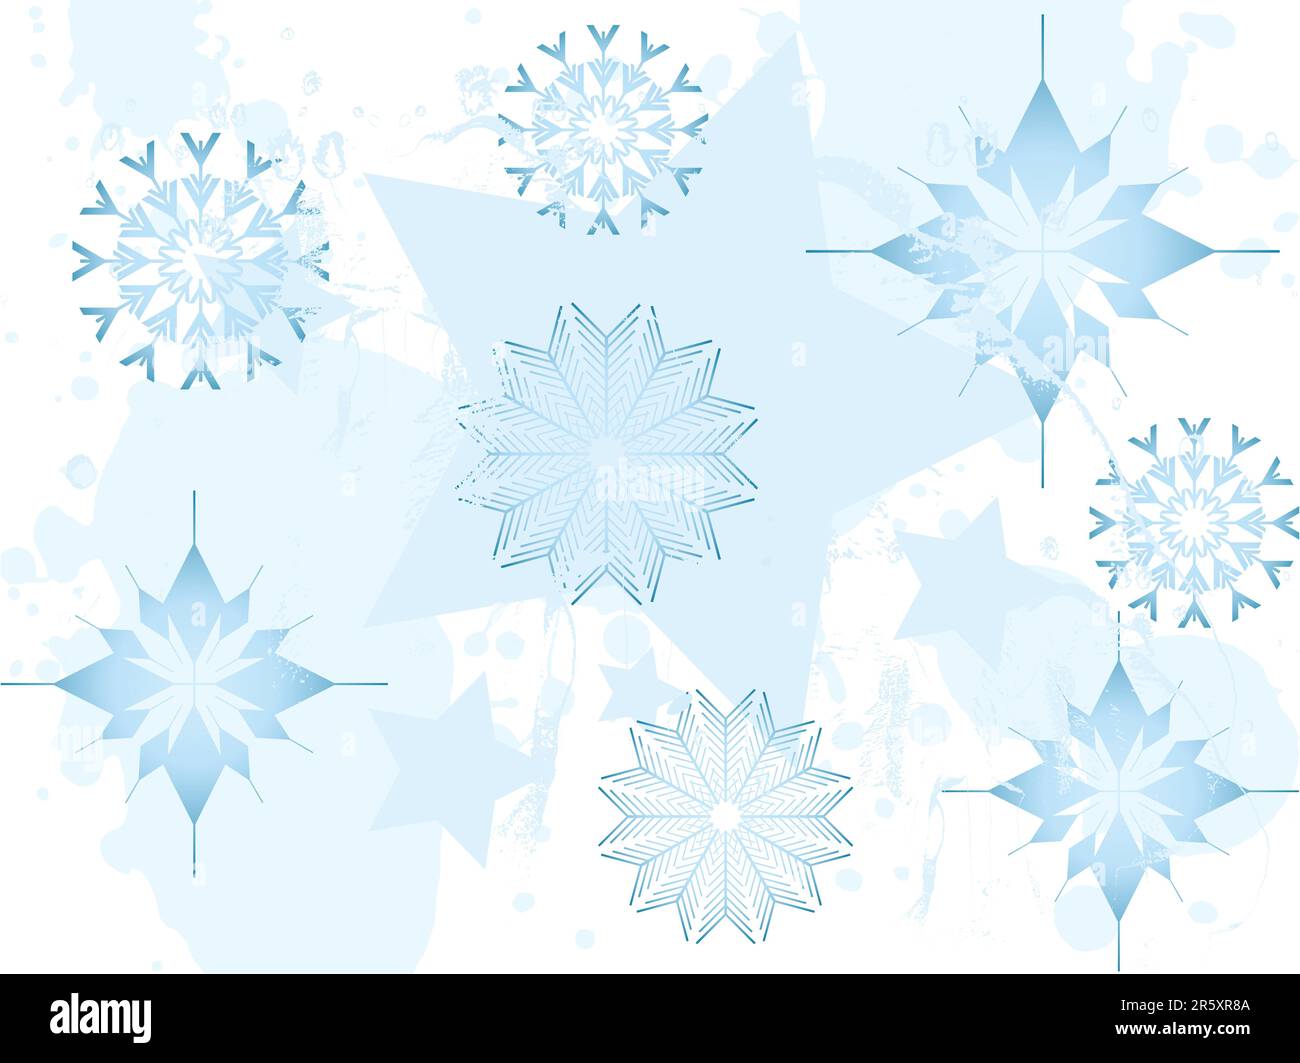 Festive winter background with snowflakes, stars and grunge splats Stock Vector